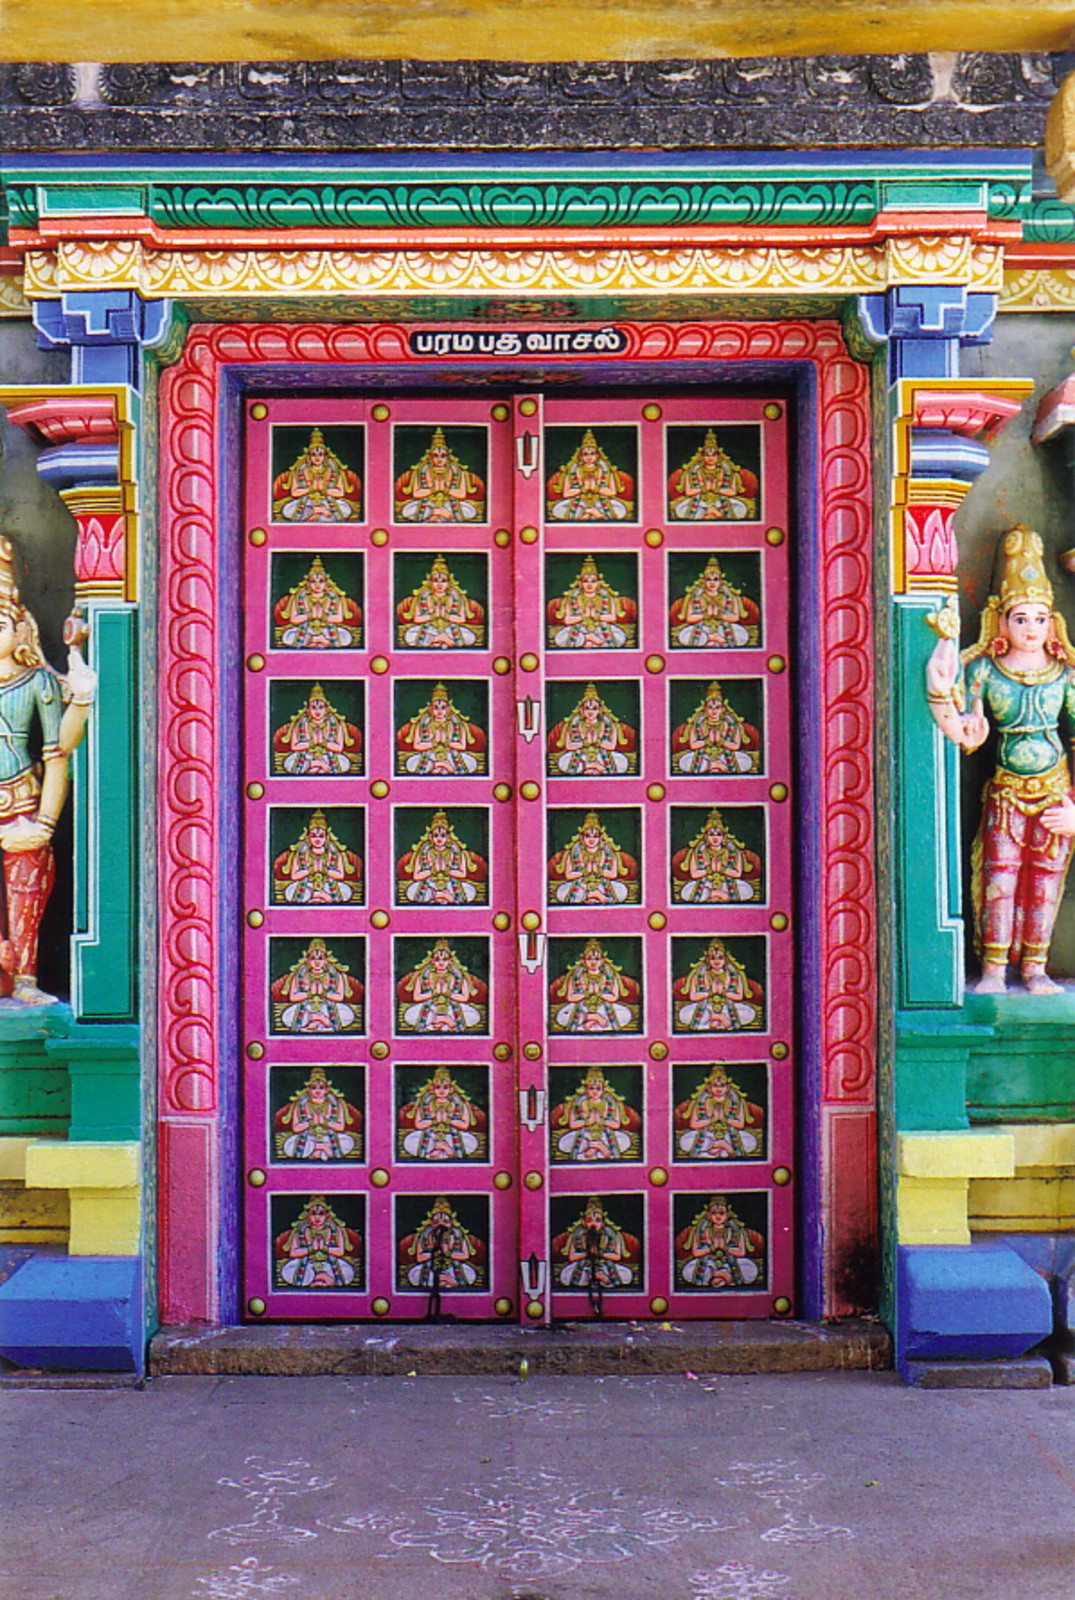 A Colourful Door In Sri Ranganathaswamy Temple A Picture From Trichy